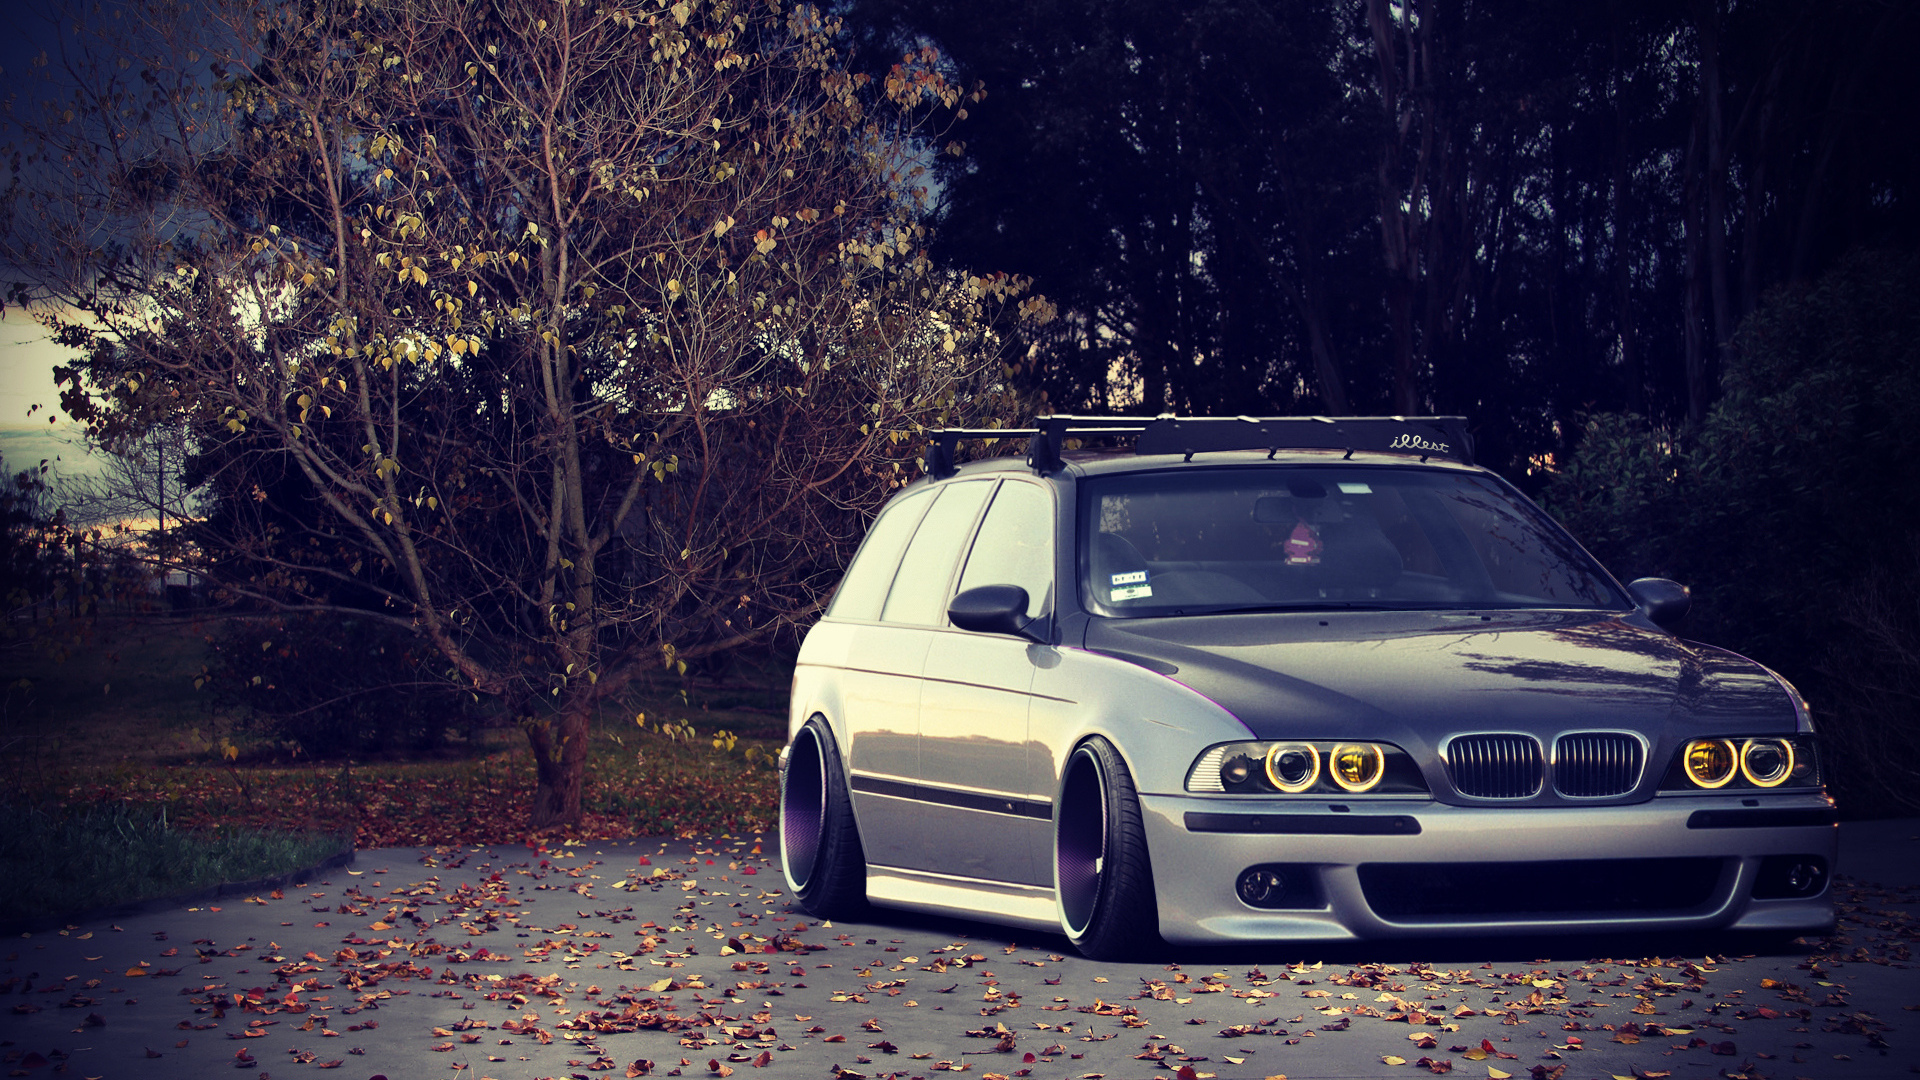 Bmw E39 Wallpaper Image Photos Pictures Background